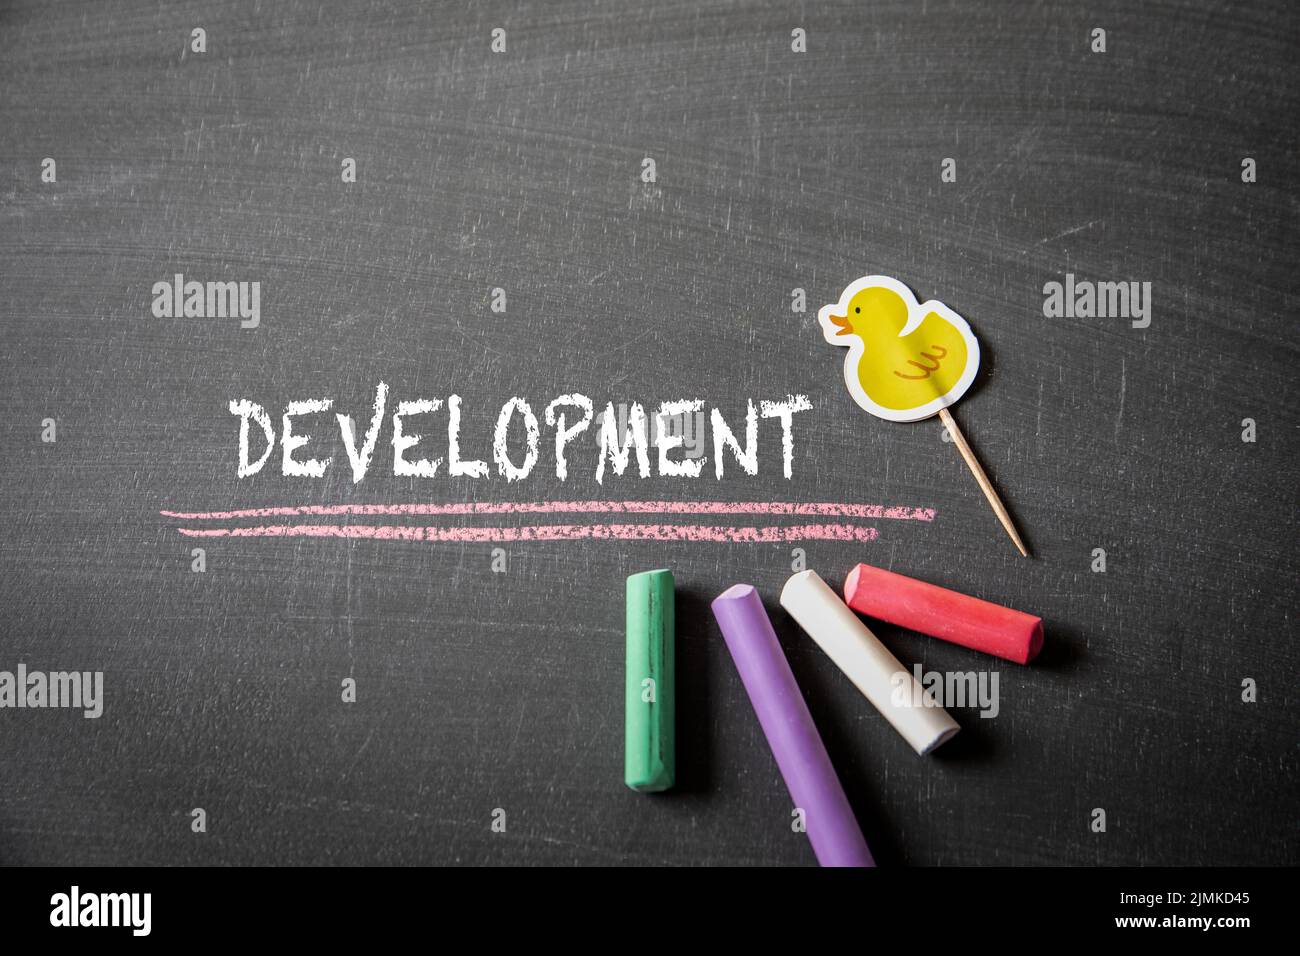 Development. Text and colored pieces of chalk on a dark blackboard. Stock Photo